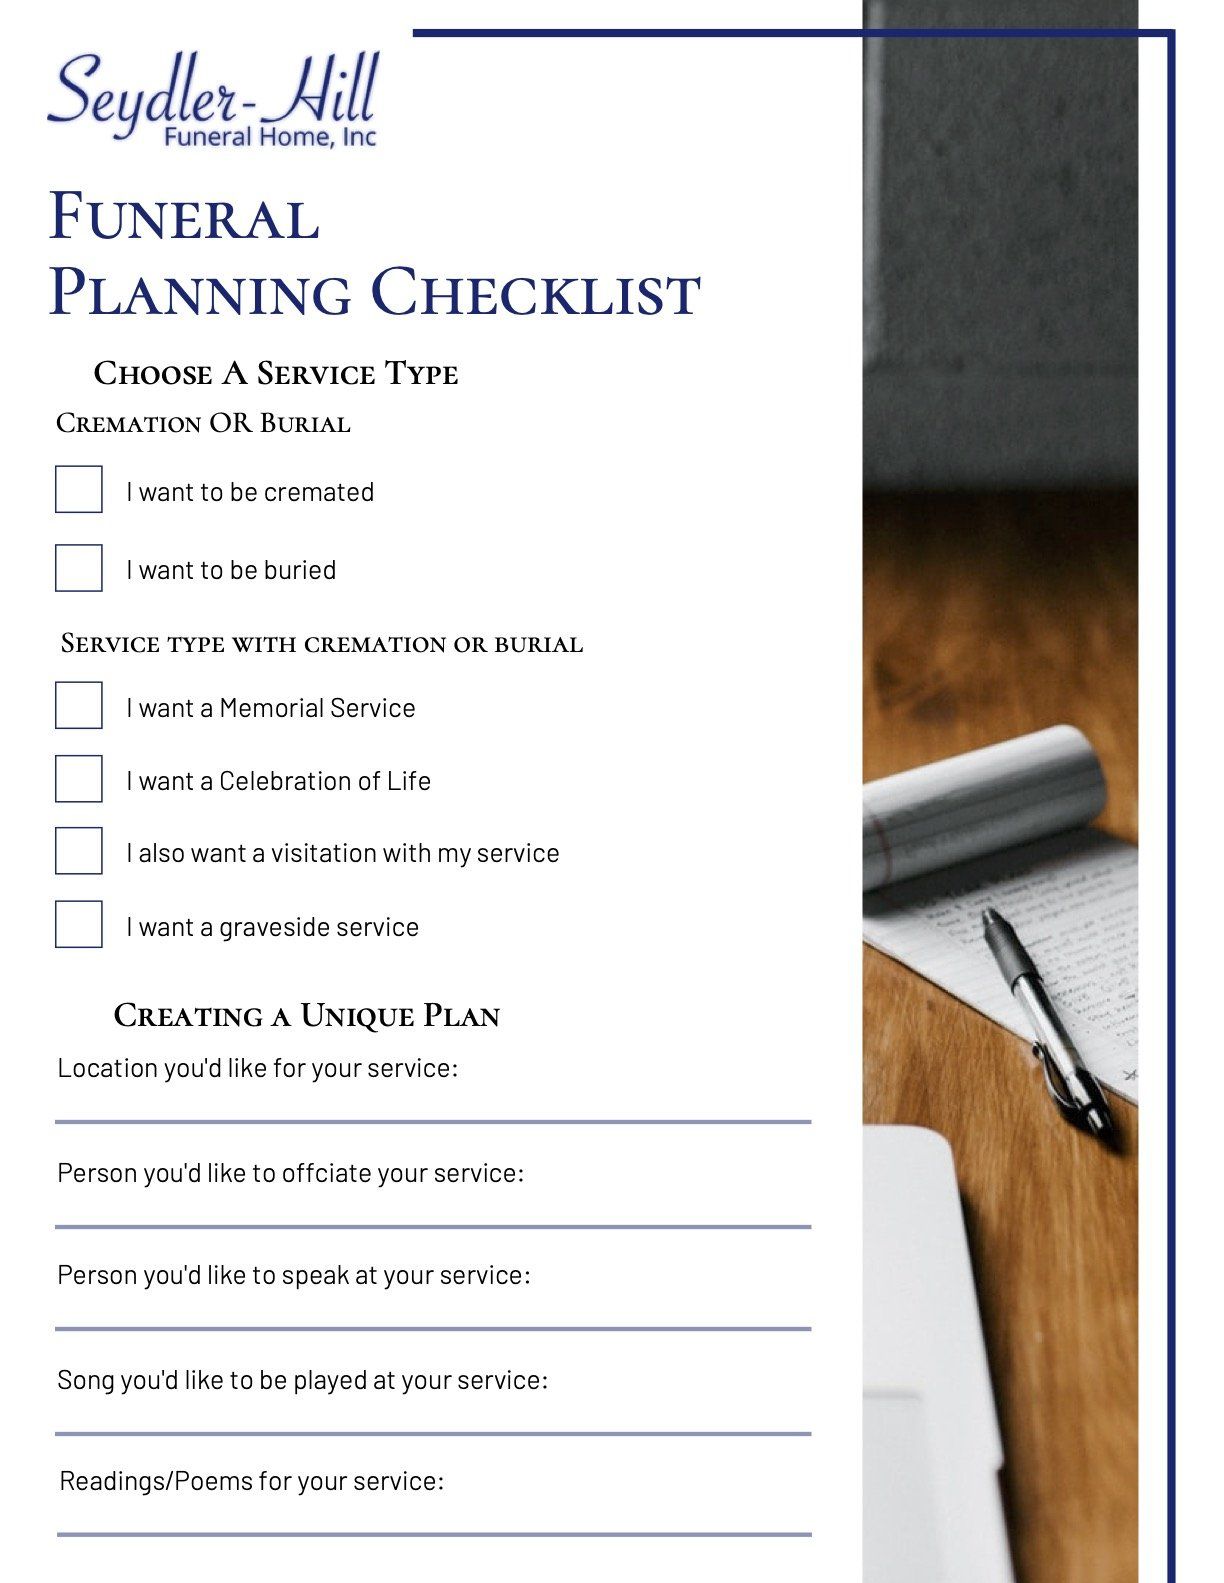 Funeral PrePlanning Guide Seydler Hill Funeral Home